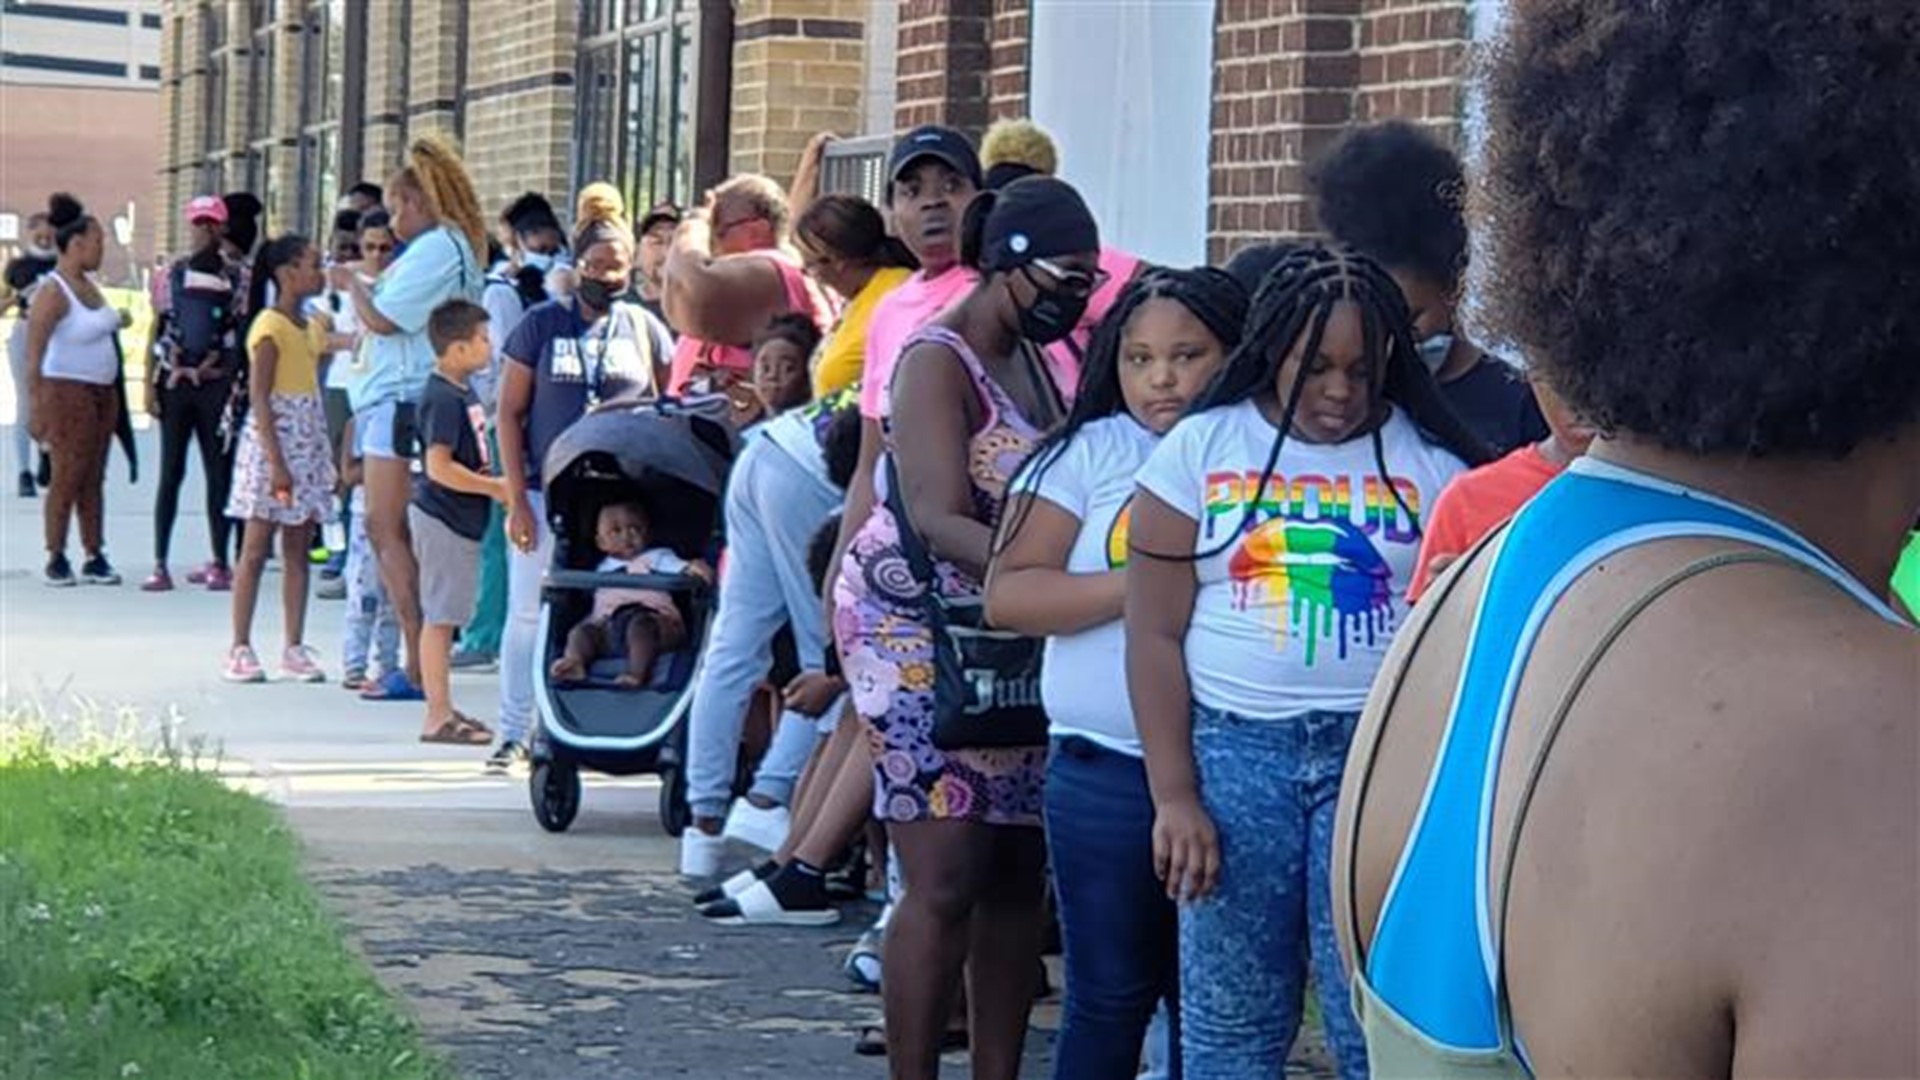 Church members gave out school supplies, gas cards and baby formula to those who waited in line.